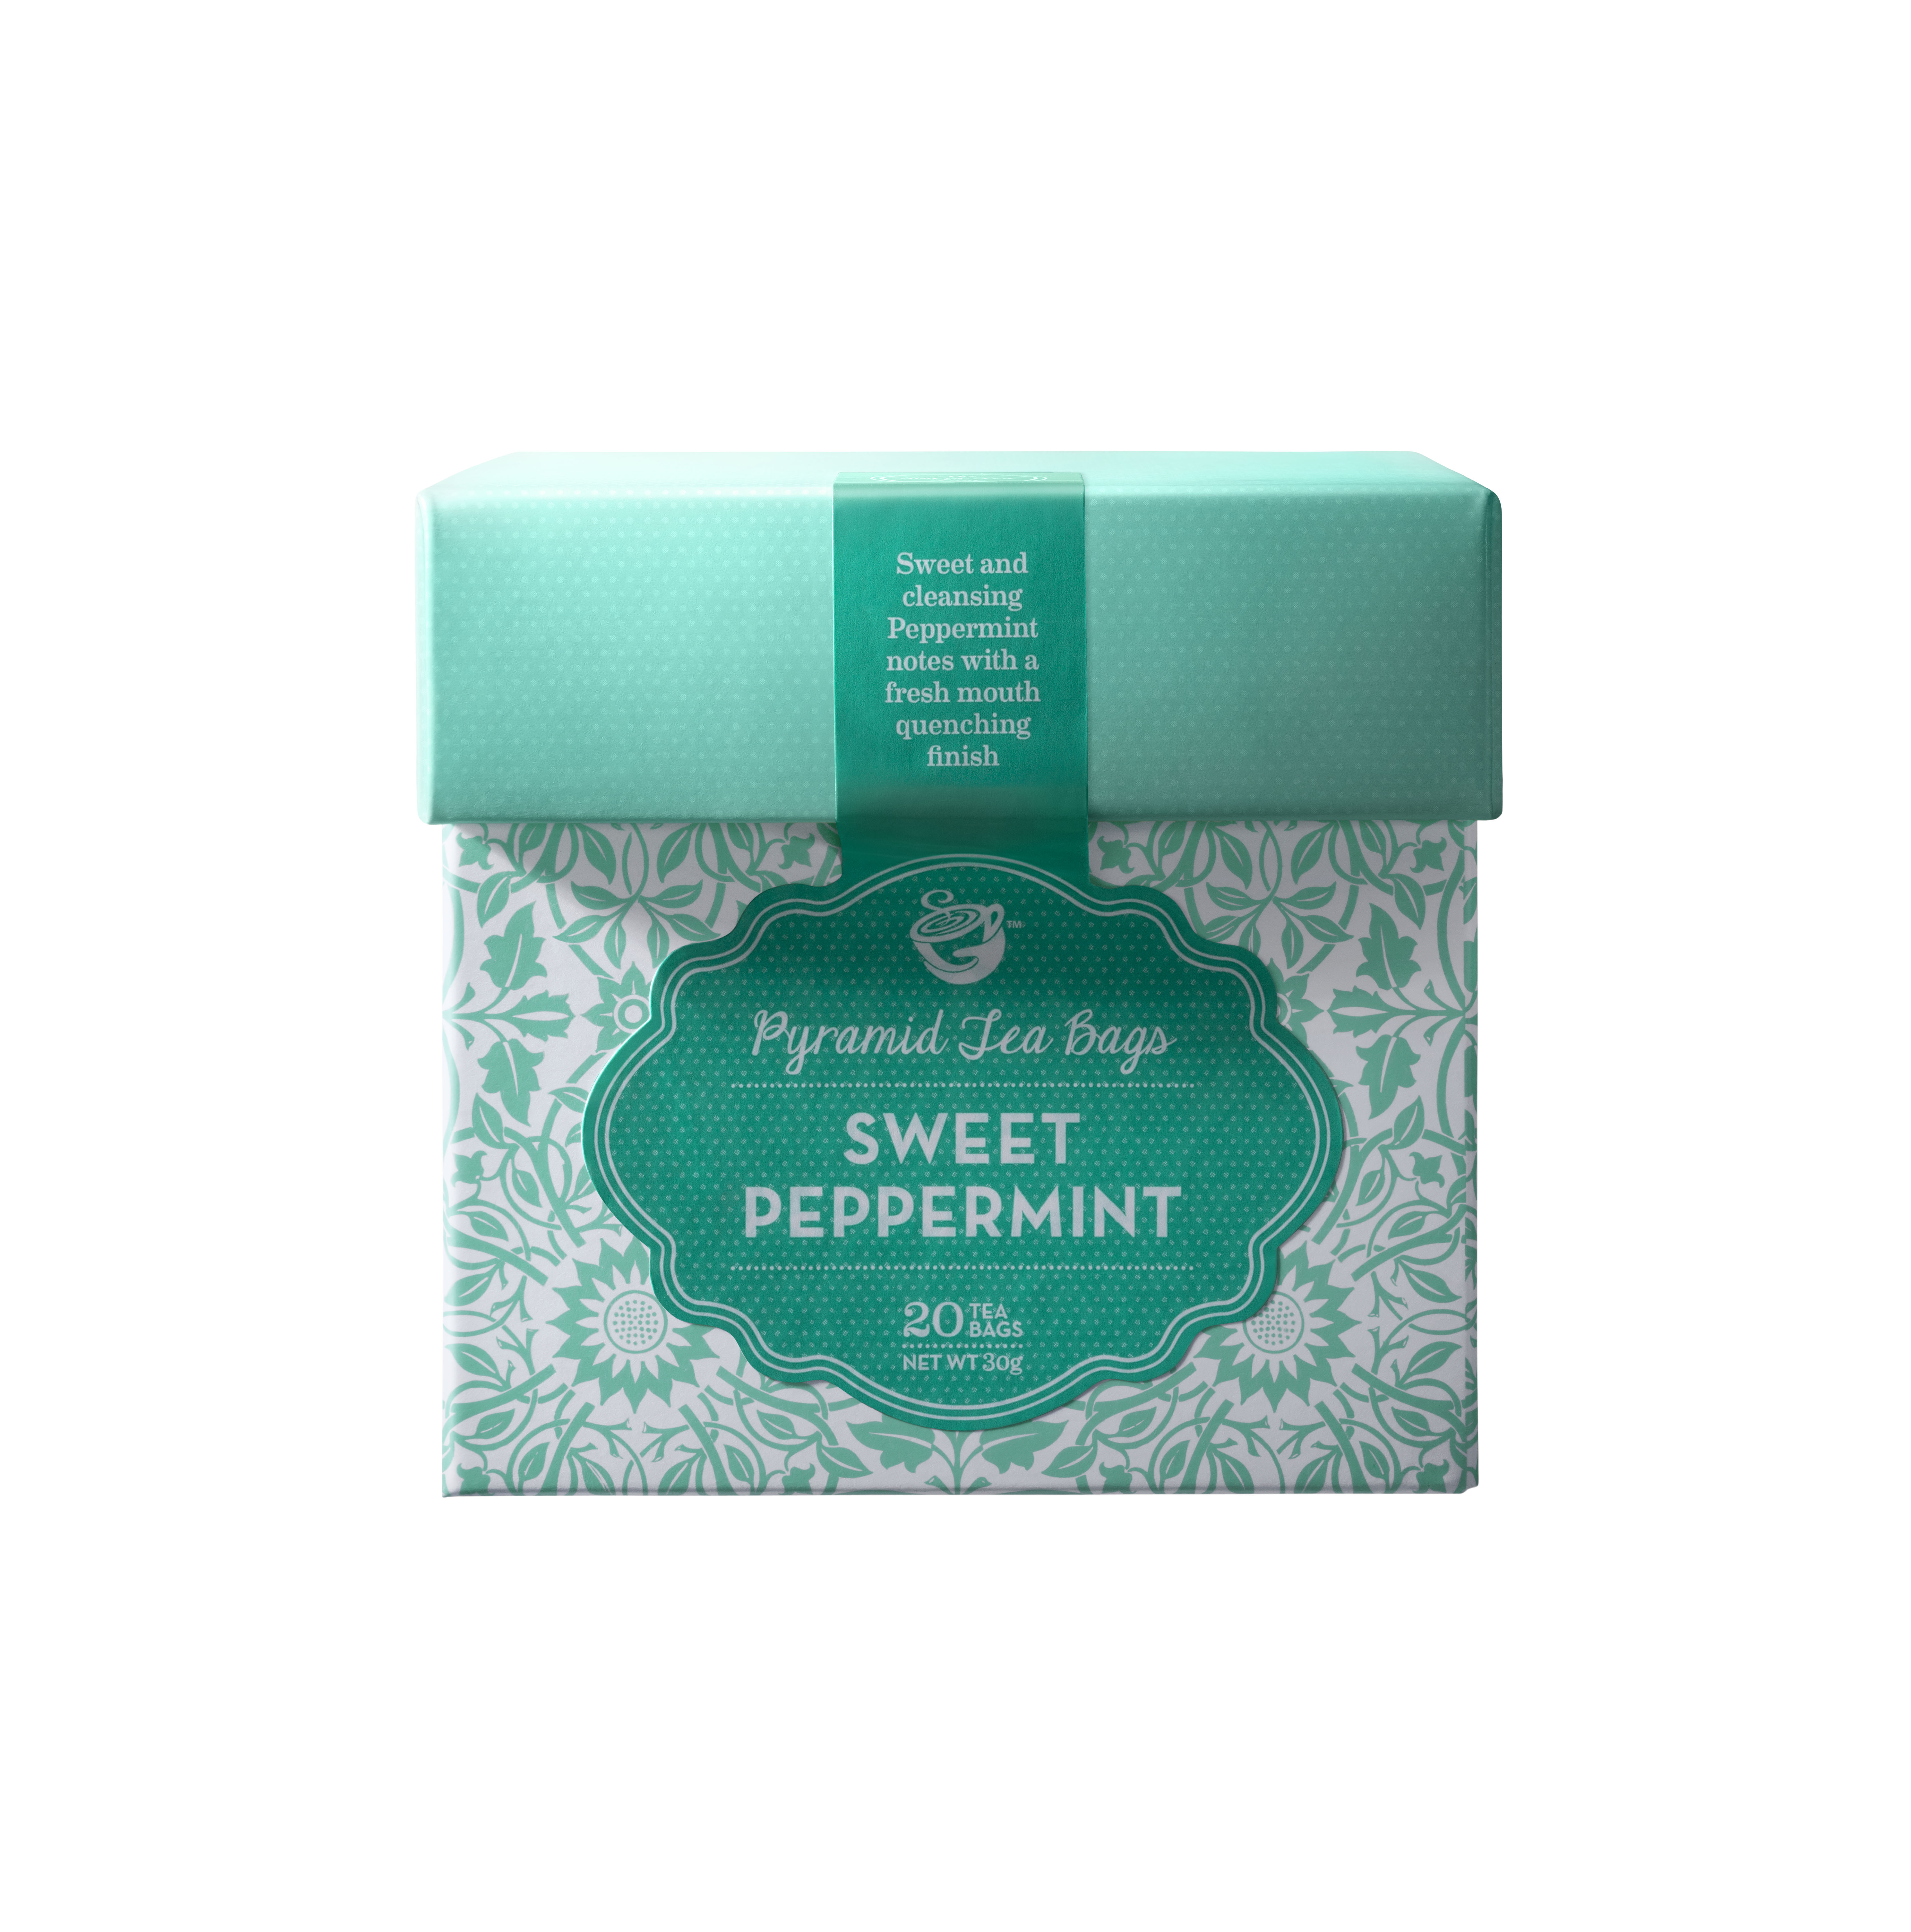 Peppermint Cacao – Good Stuff Cacao